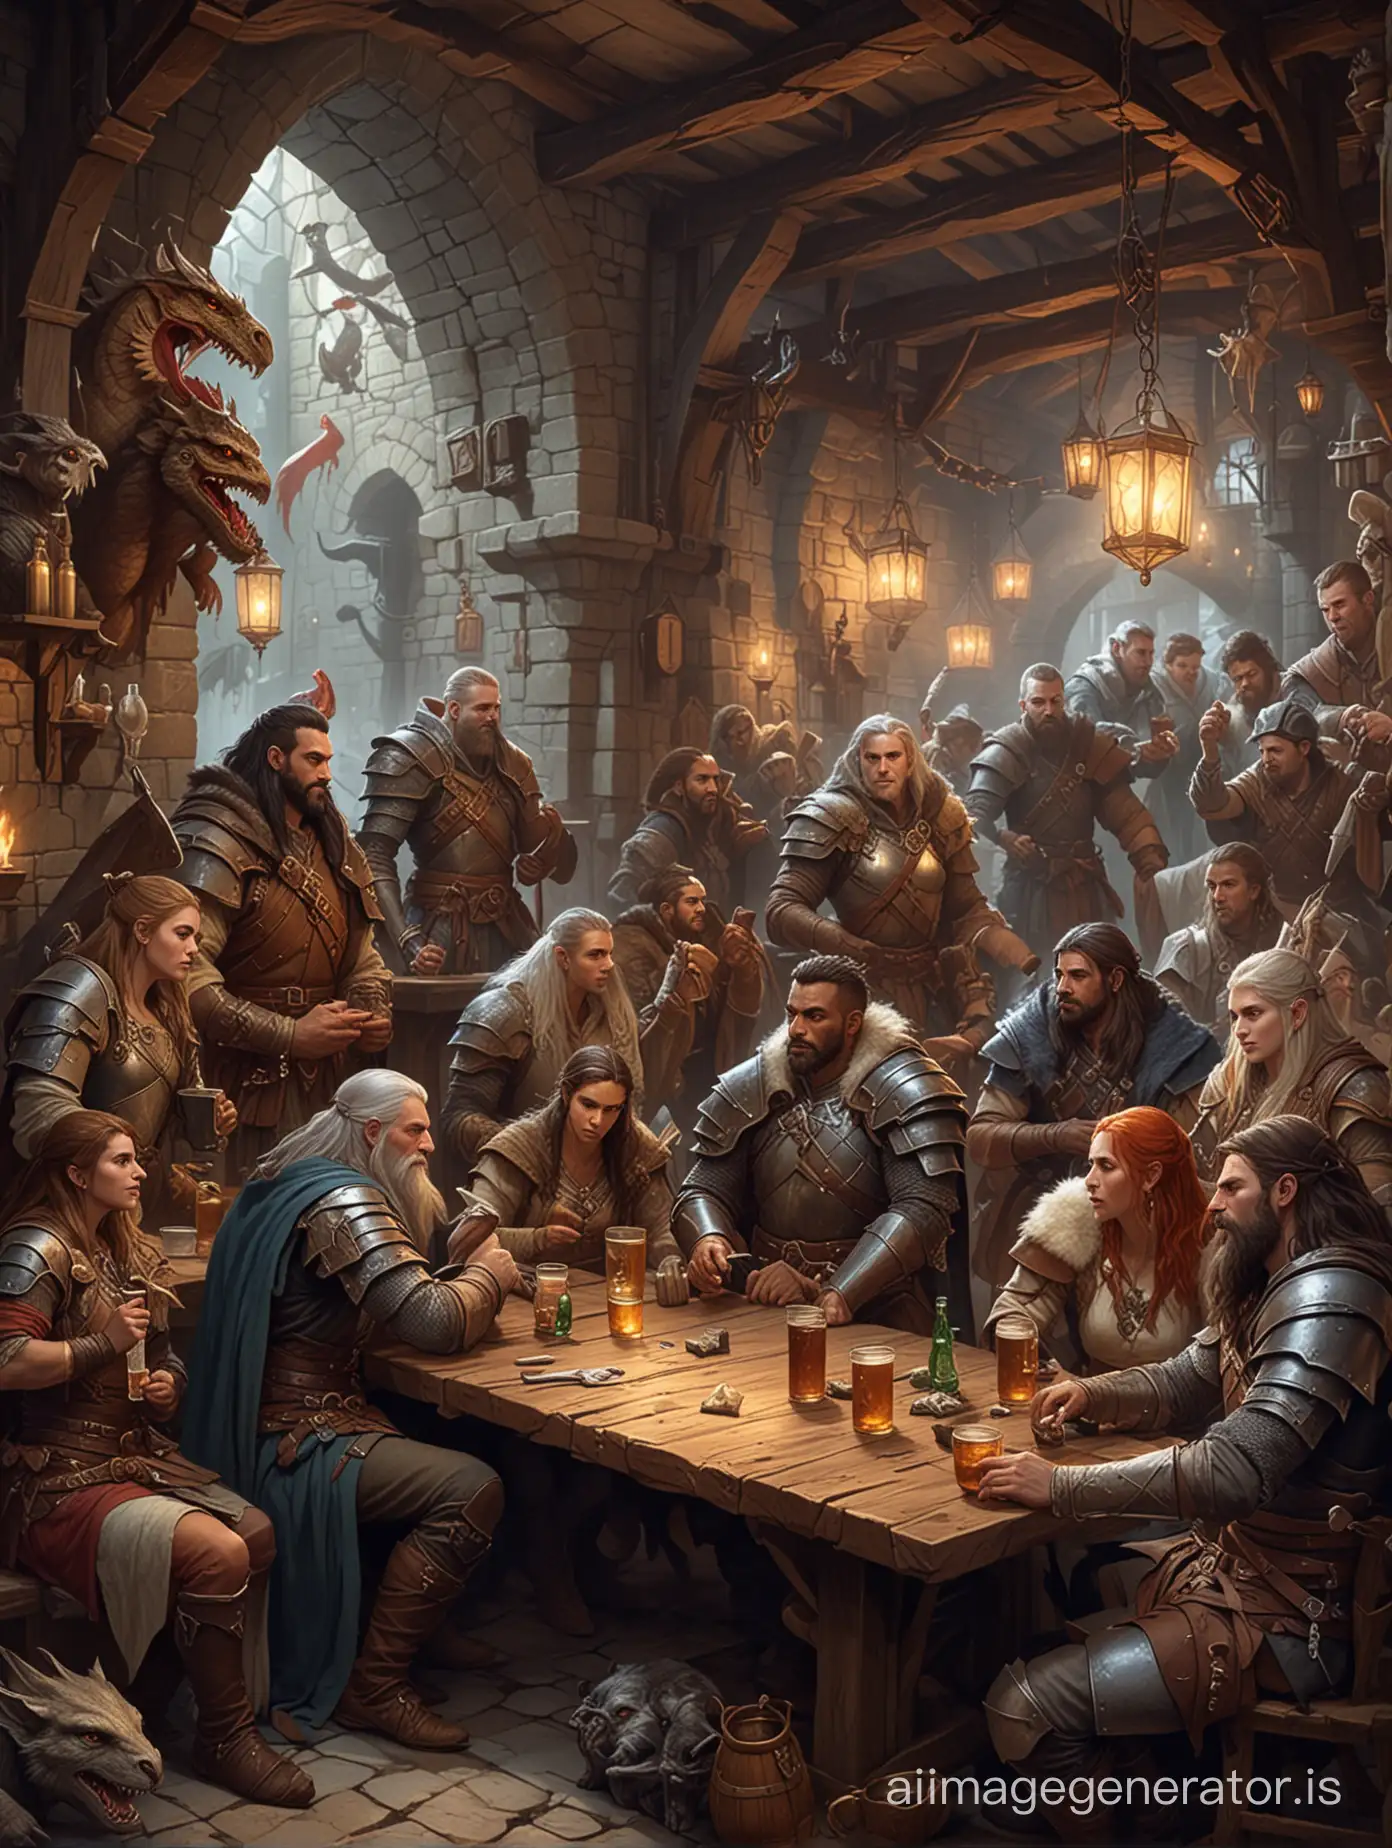 Medieval-Fantasy-Tavern-Dungeons-and-Dragons-Characters-Unite-for-Mirth-and-Merriment